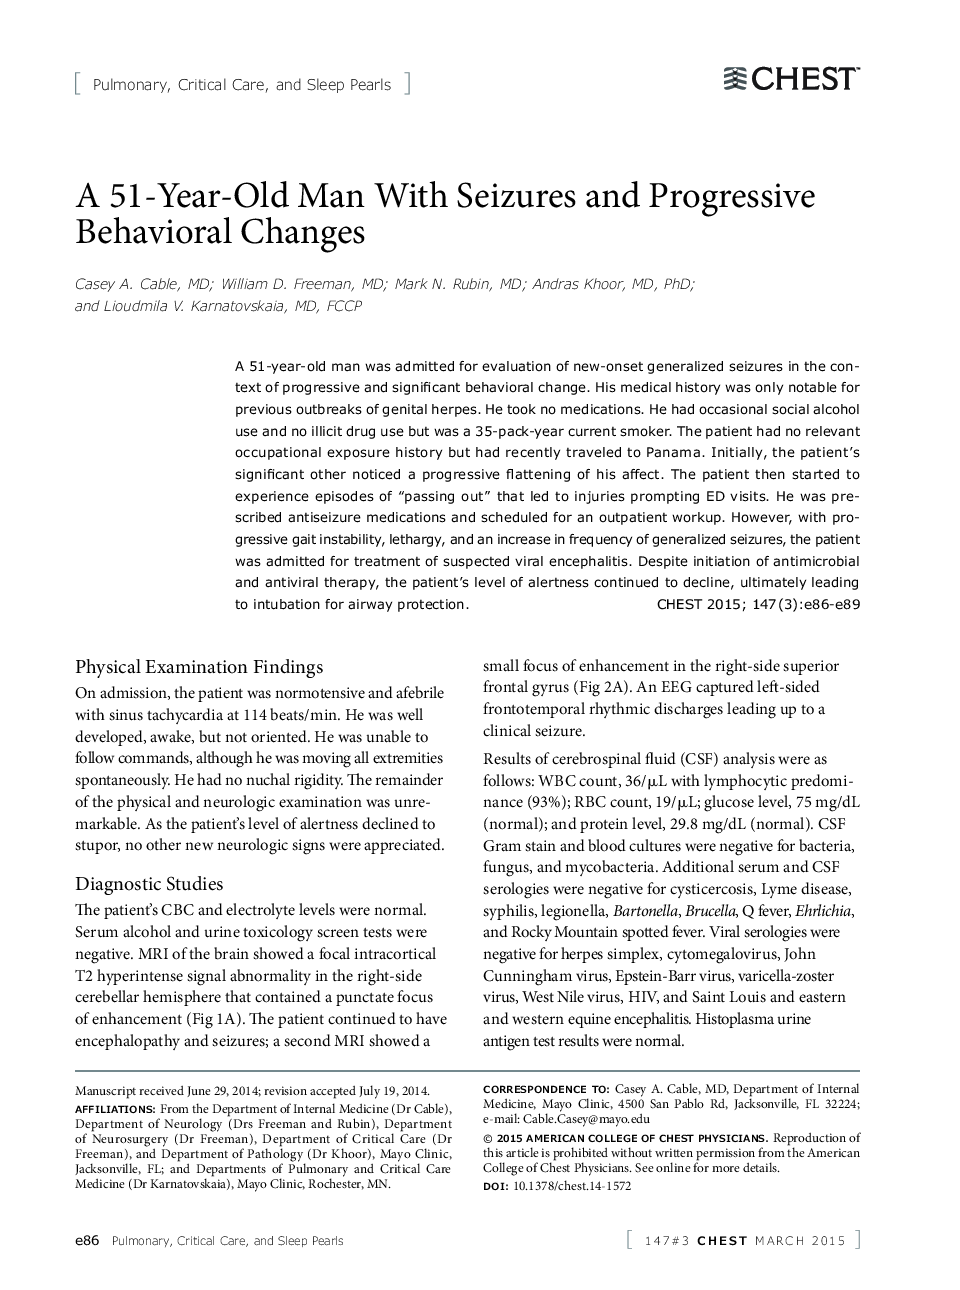 A 51-Year-Old Man With Seizures and Progressive Behavioral Changes 